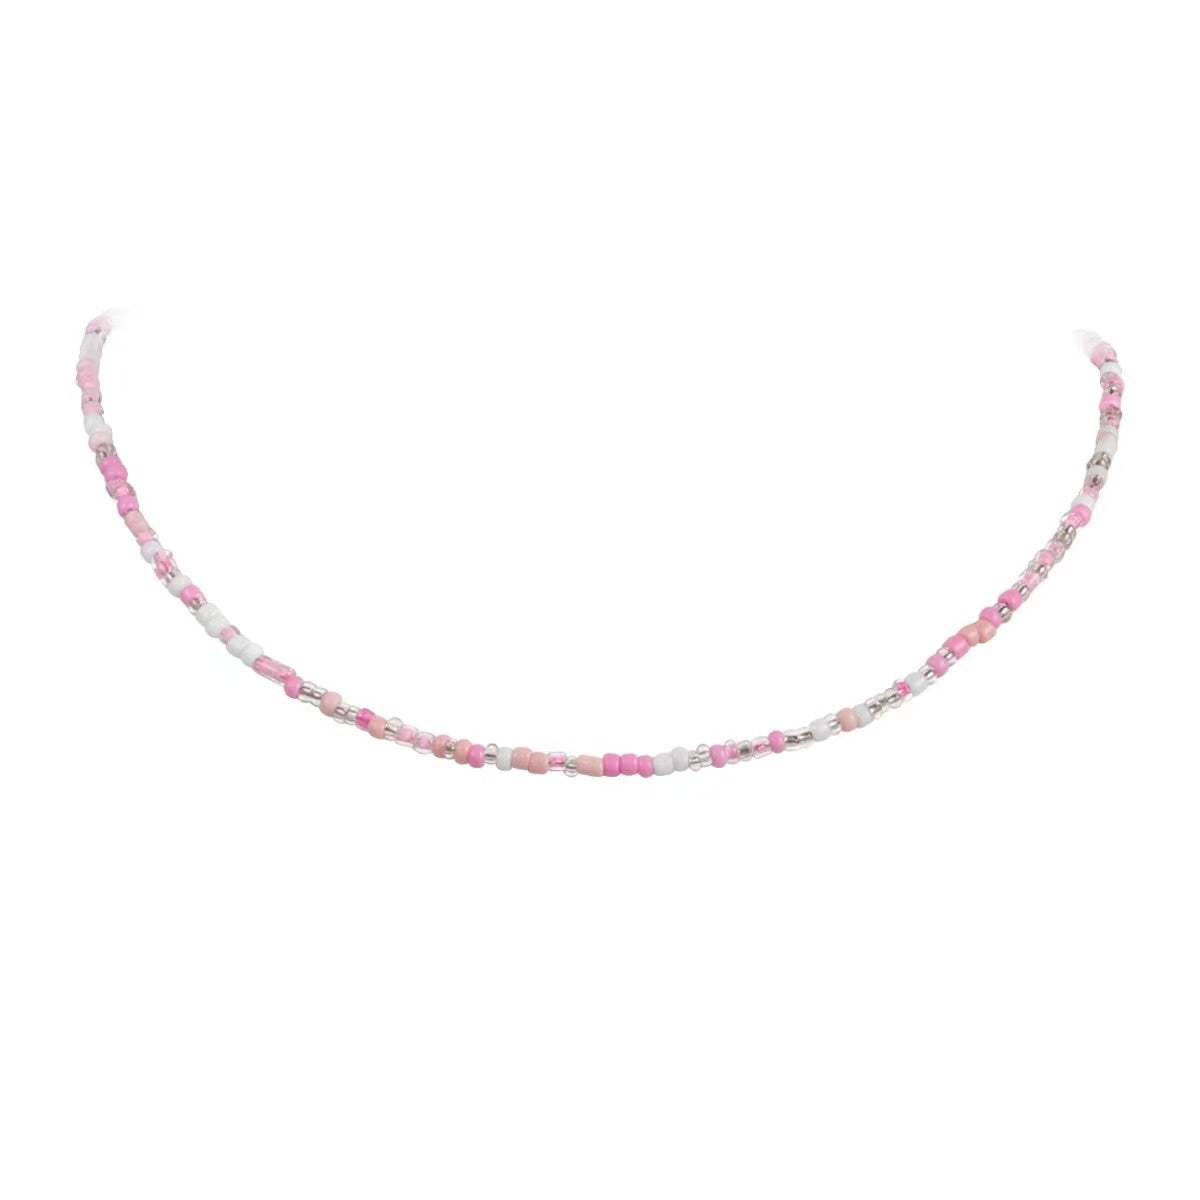 N13 Daisy Colorful/Pink Beaded Necklace